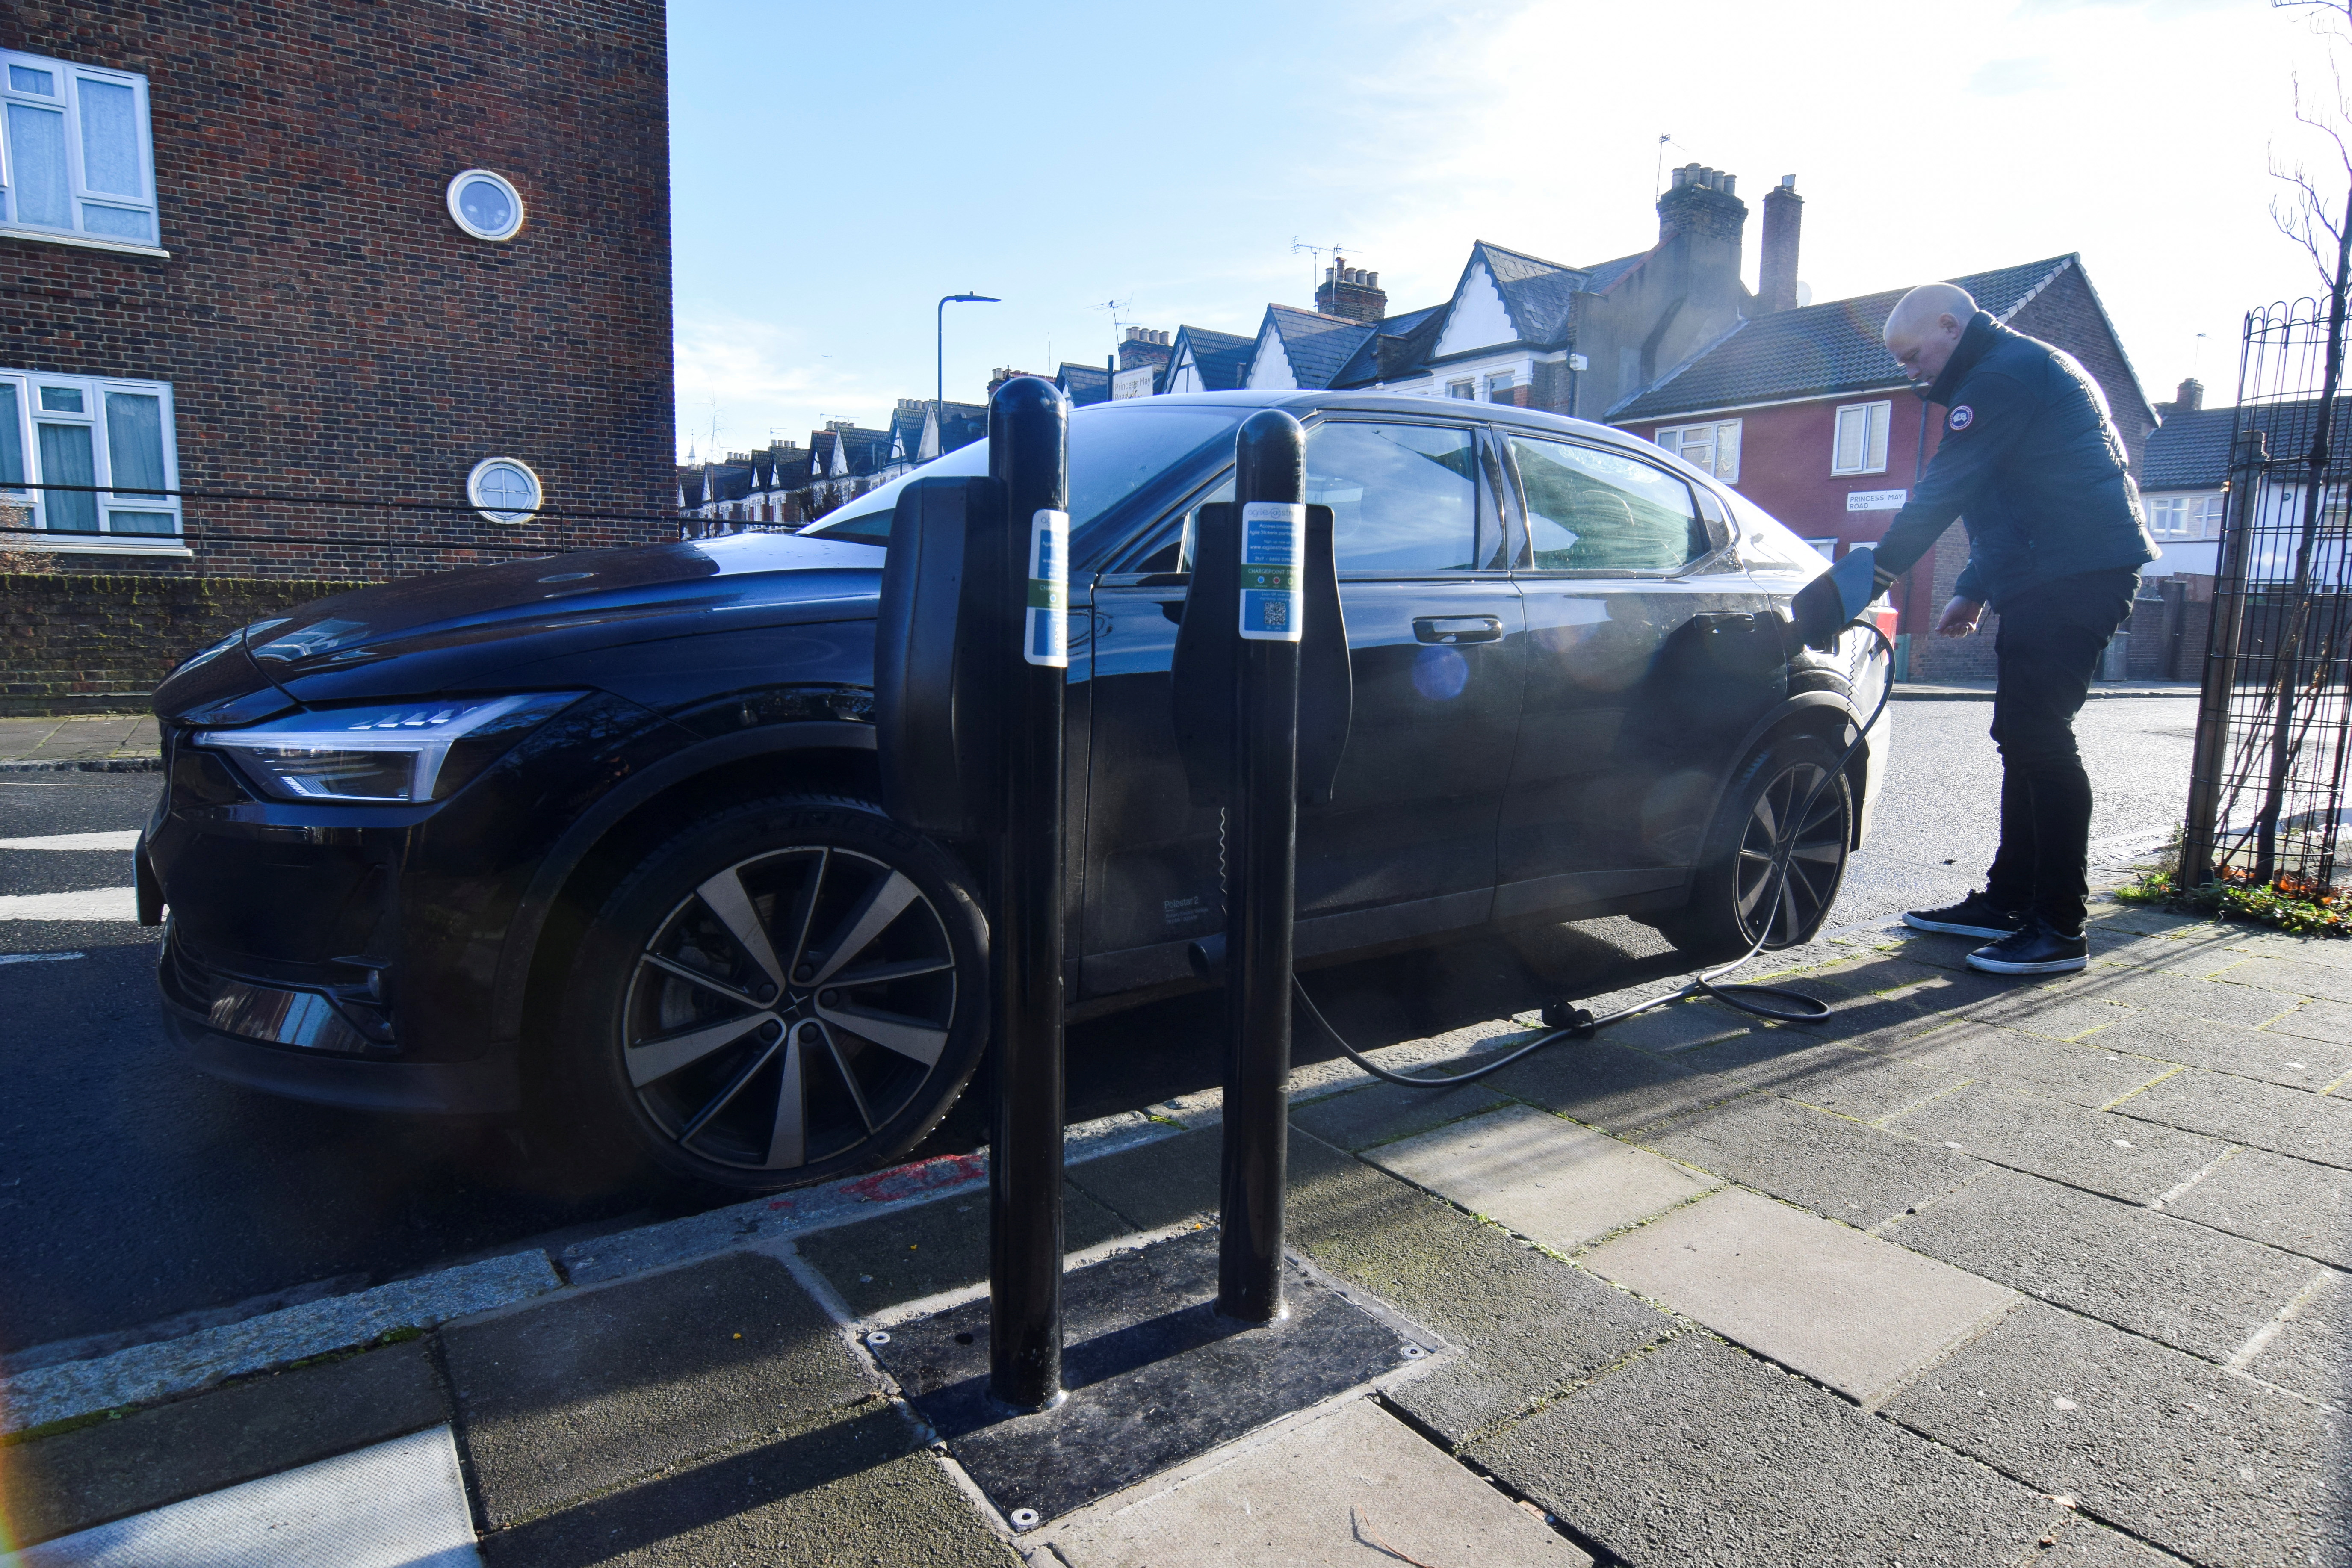 Connected Kerb CEO Chris Pateman-Jones plugs his electric vehicle into one of the charging infrastructure company's smart public on-street chargers in the borough of Hackney, London, Britain, January 12, 2022. REUTERS/Nick Carey